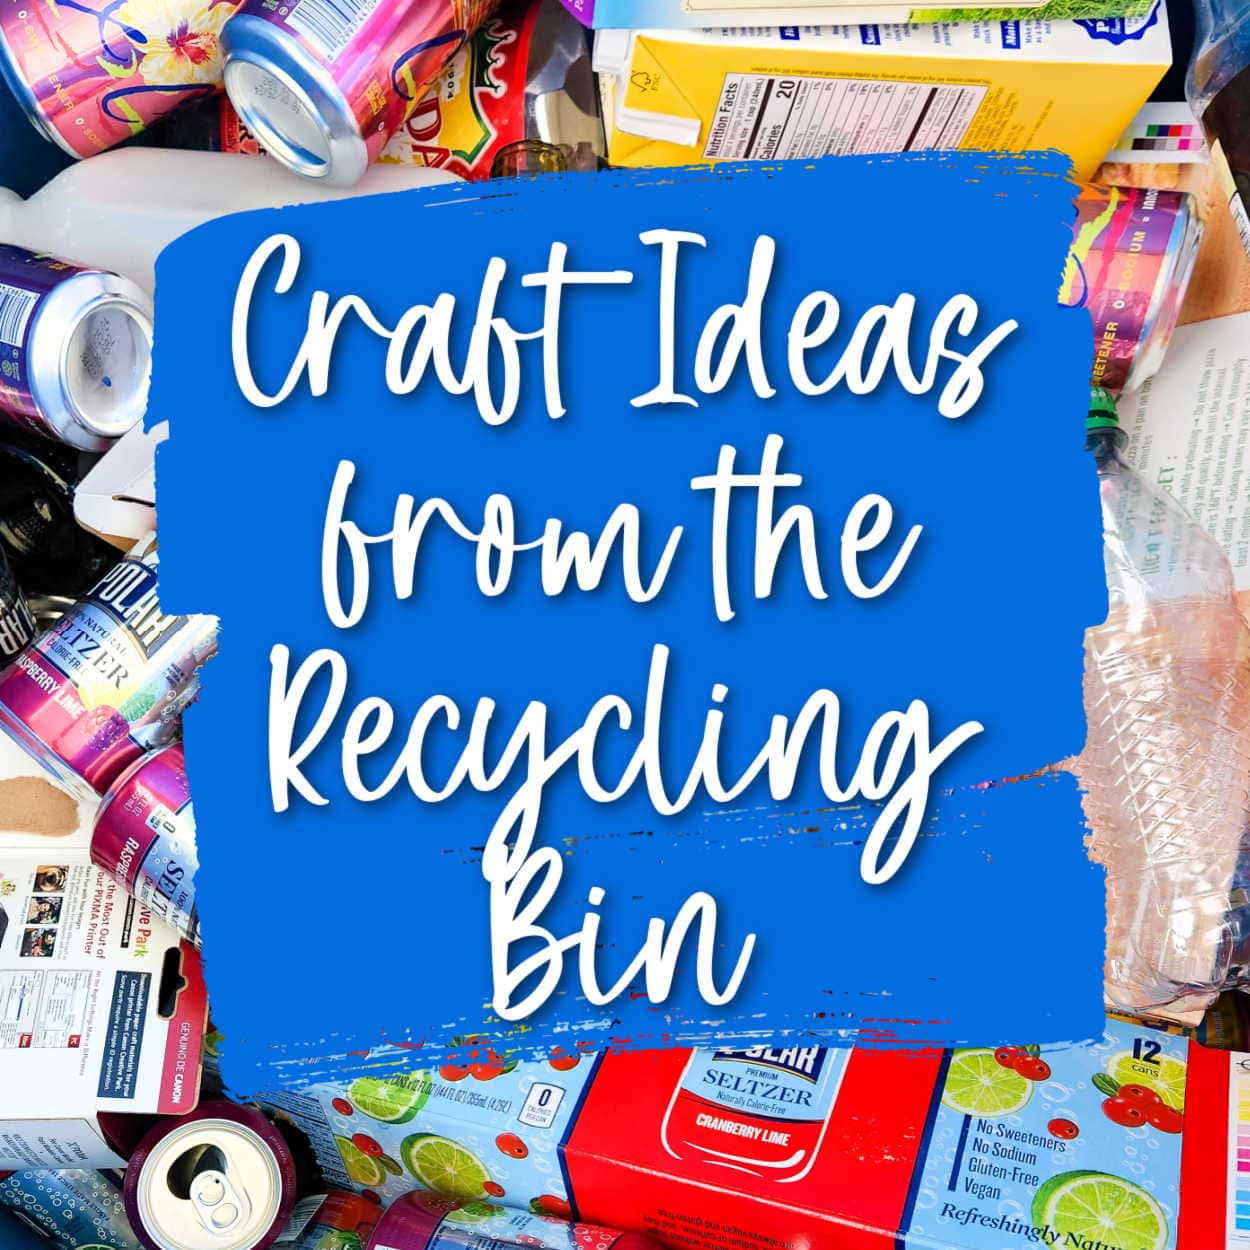 Craft Projects from the Recycling Bin